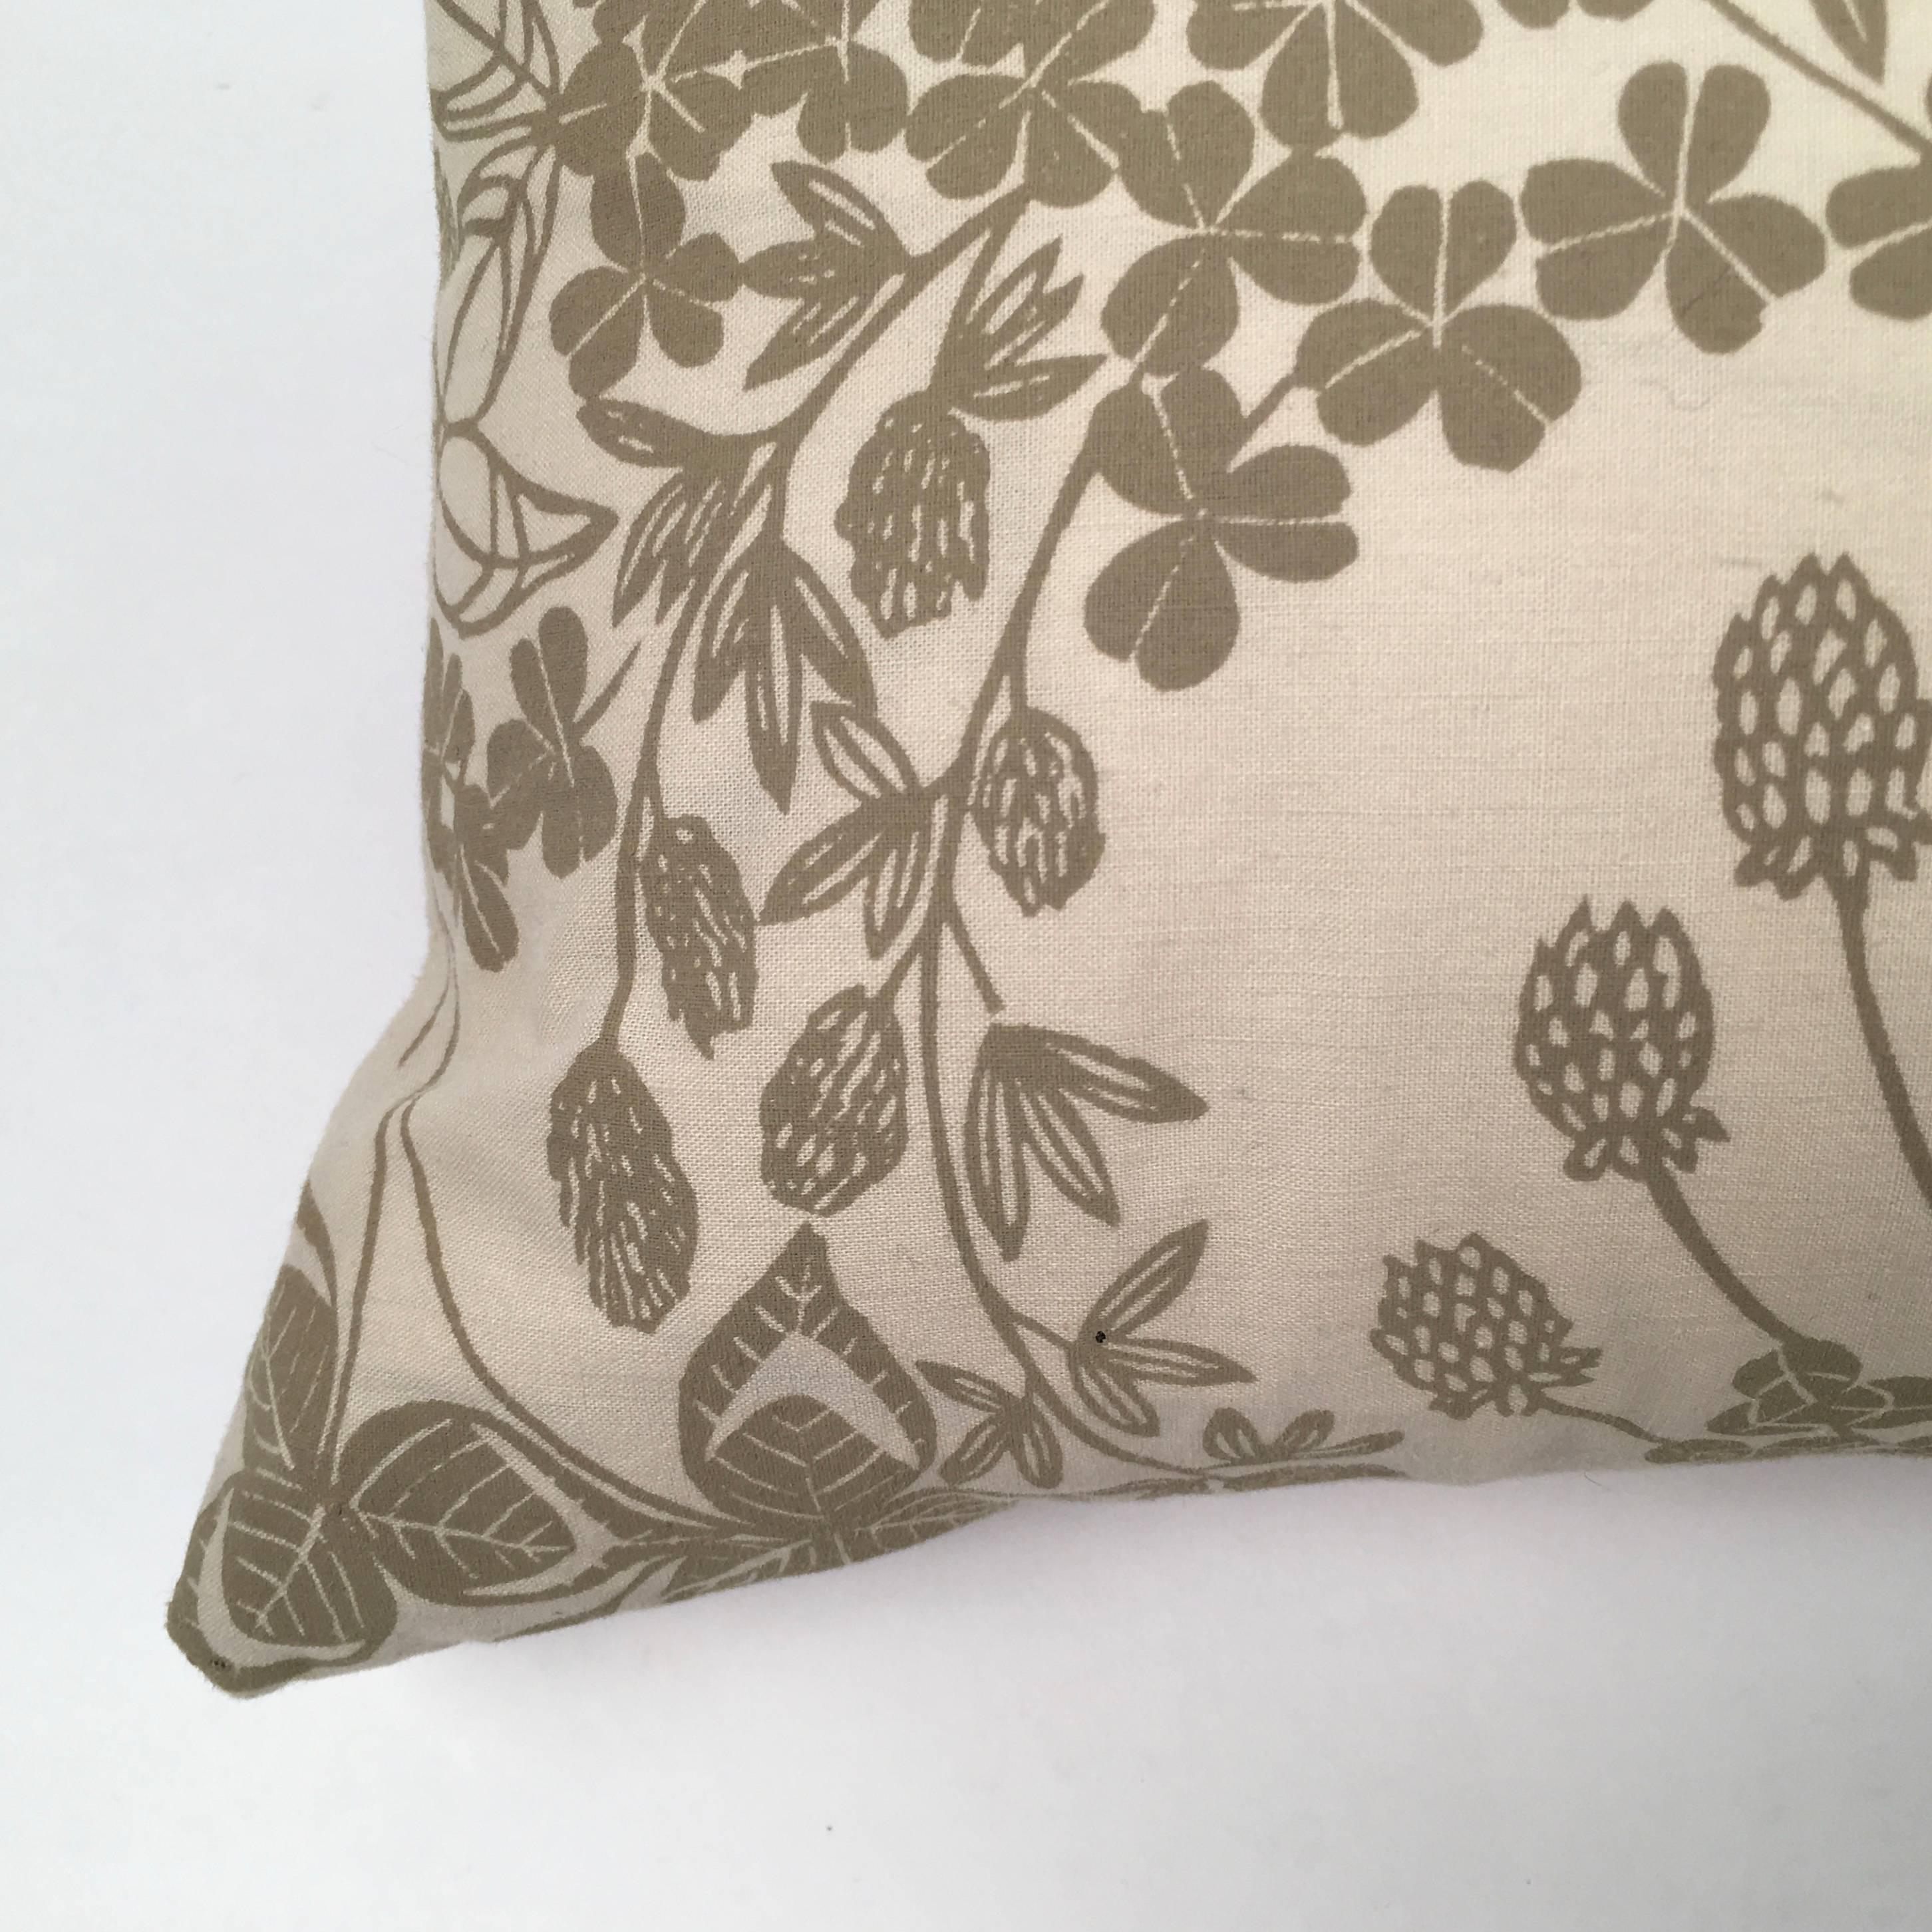 American Folly Cove Designers Hand Block Printed Clover Pillow